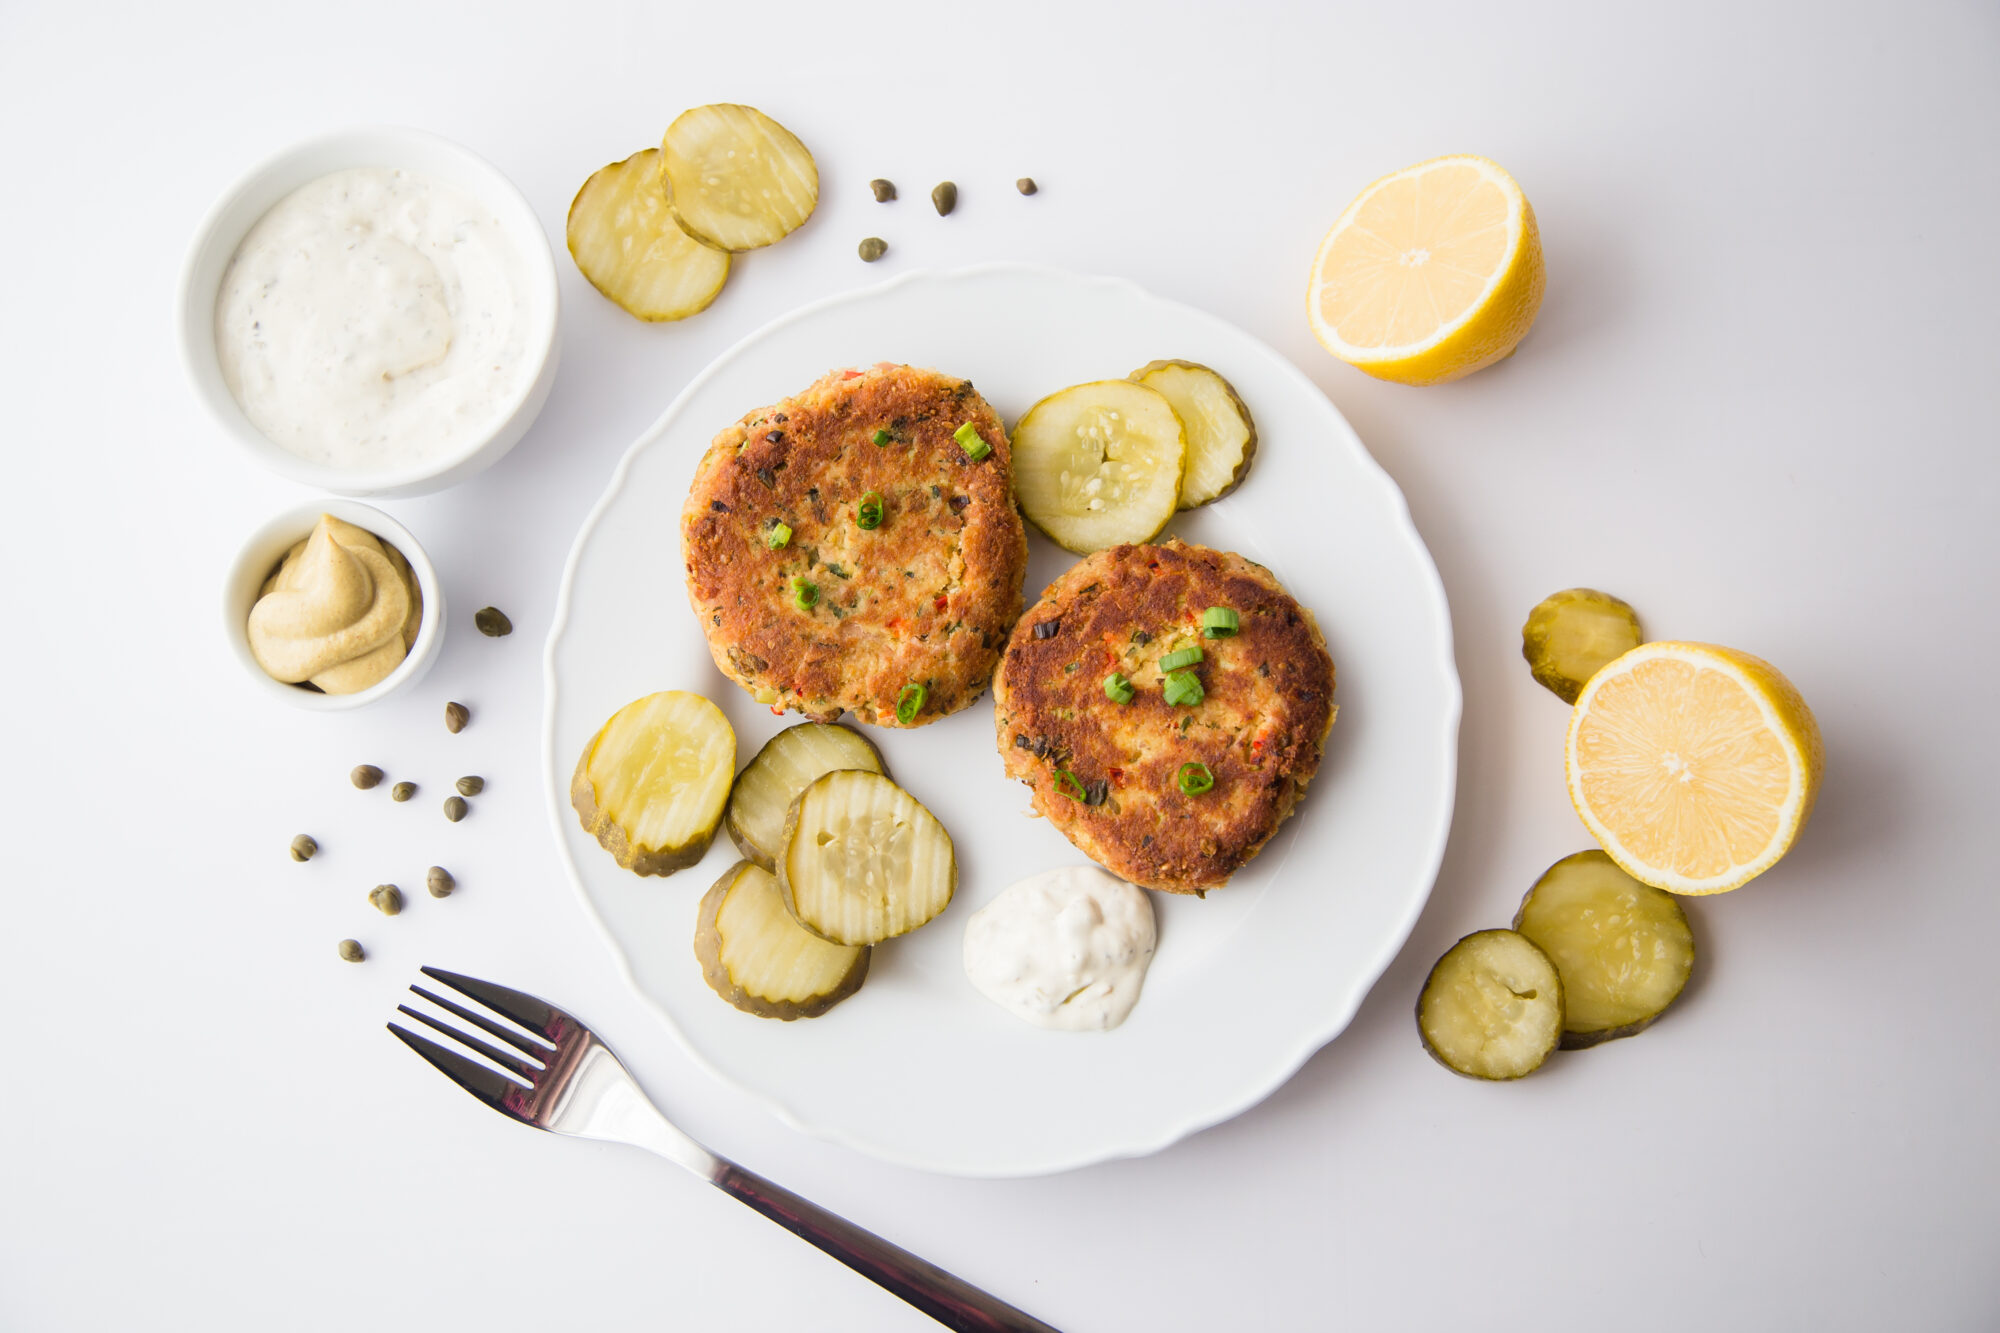 Top view- Two tuna patties on a white plate with pickle chips and lemon wedges.